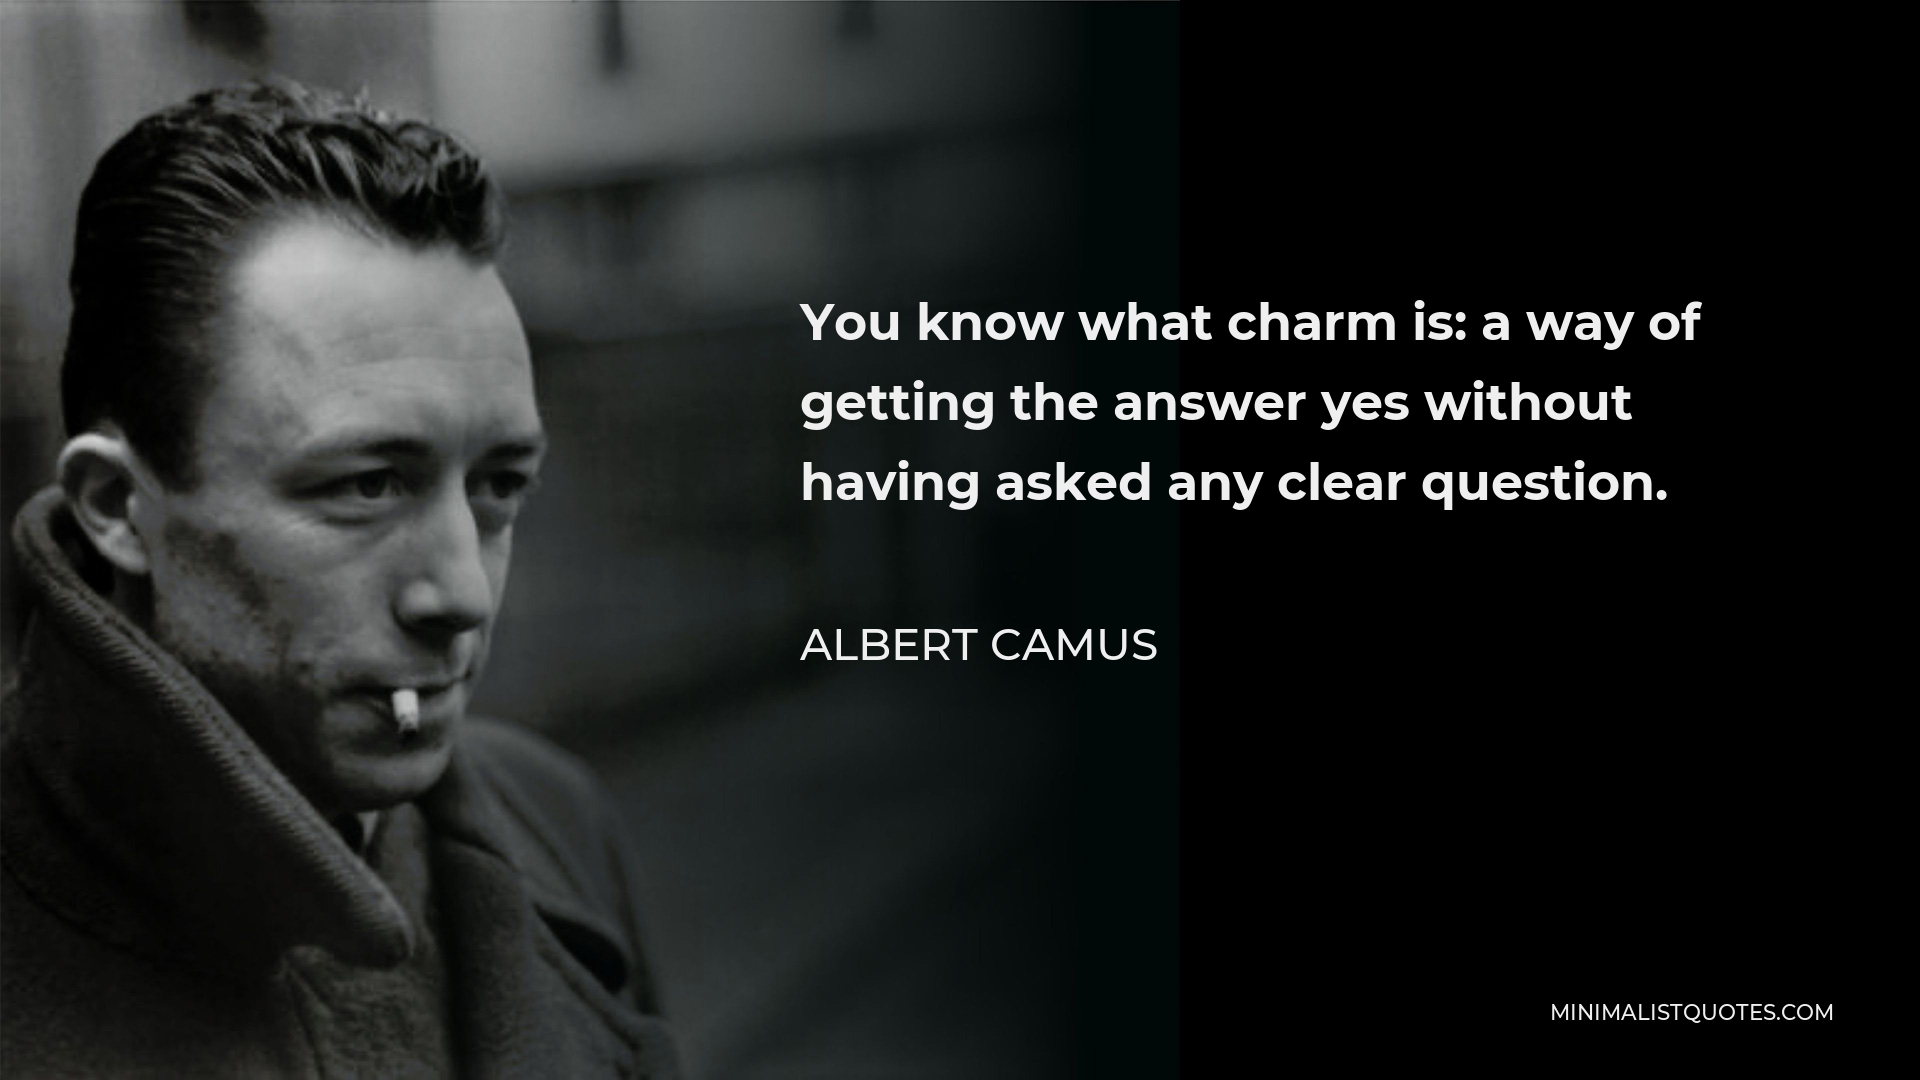 Albert Camus Quote - You know what charm is: a way of getting the answer yes without having asked any clear question.